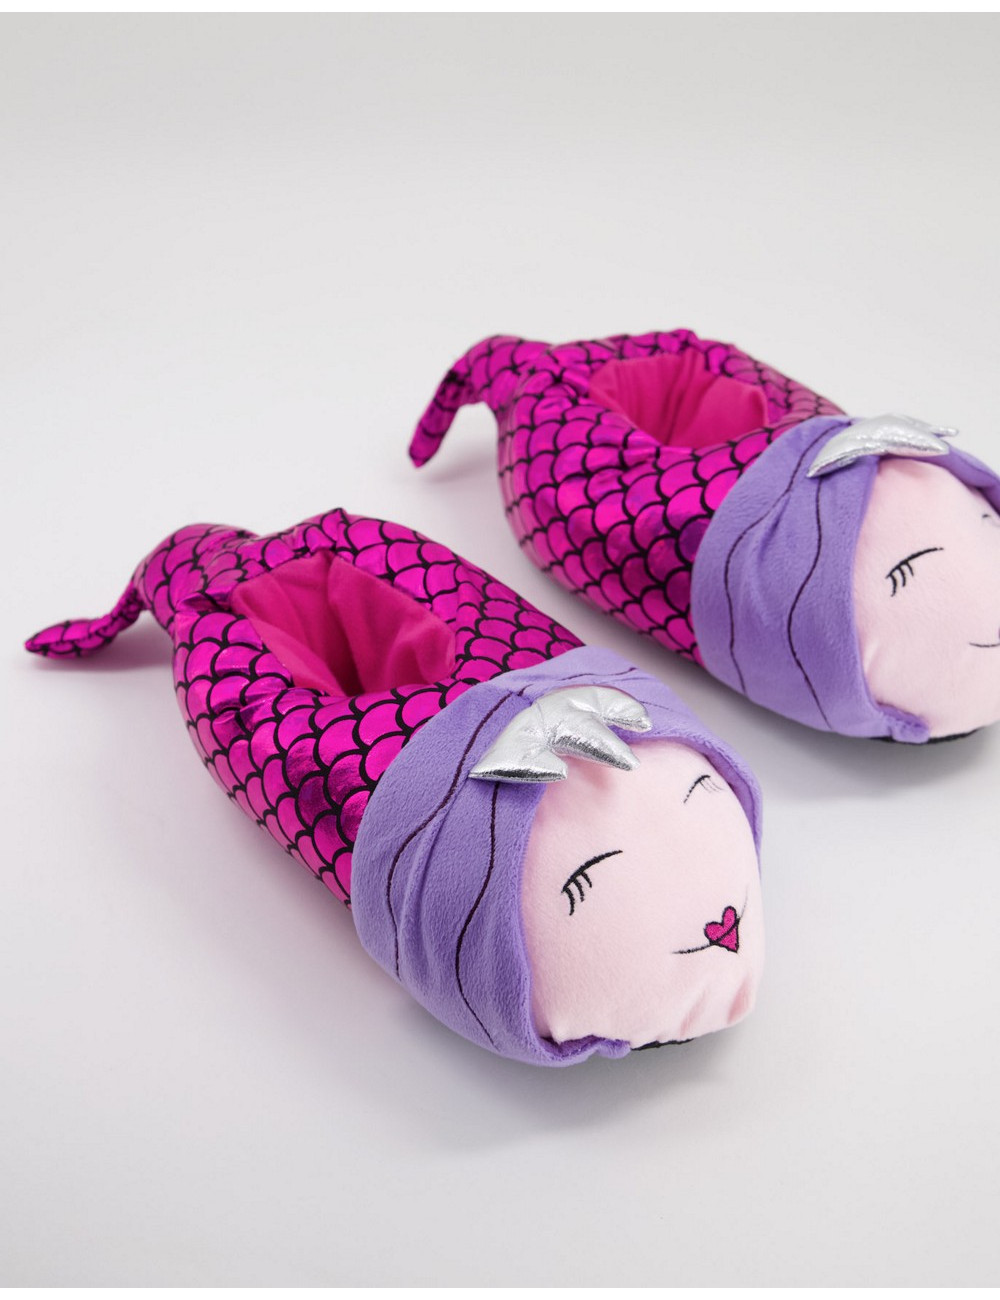 Loungeable mermaid slippers...